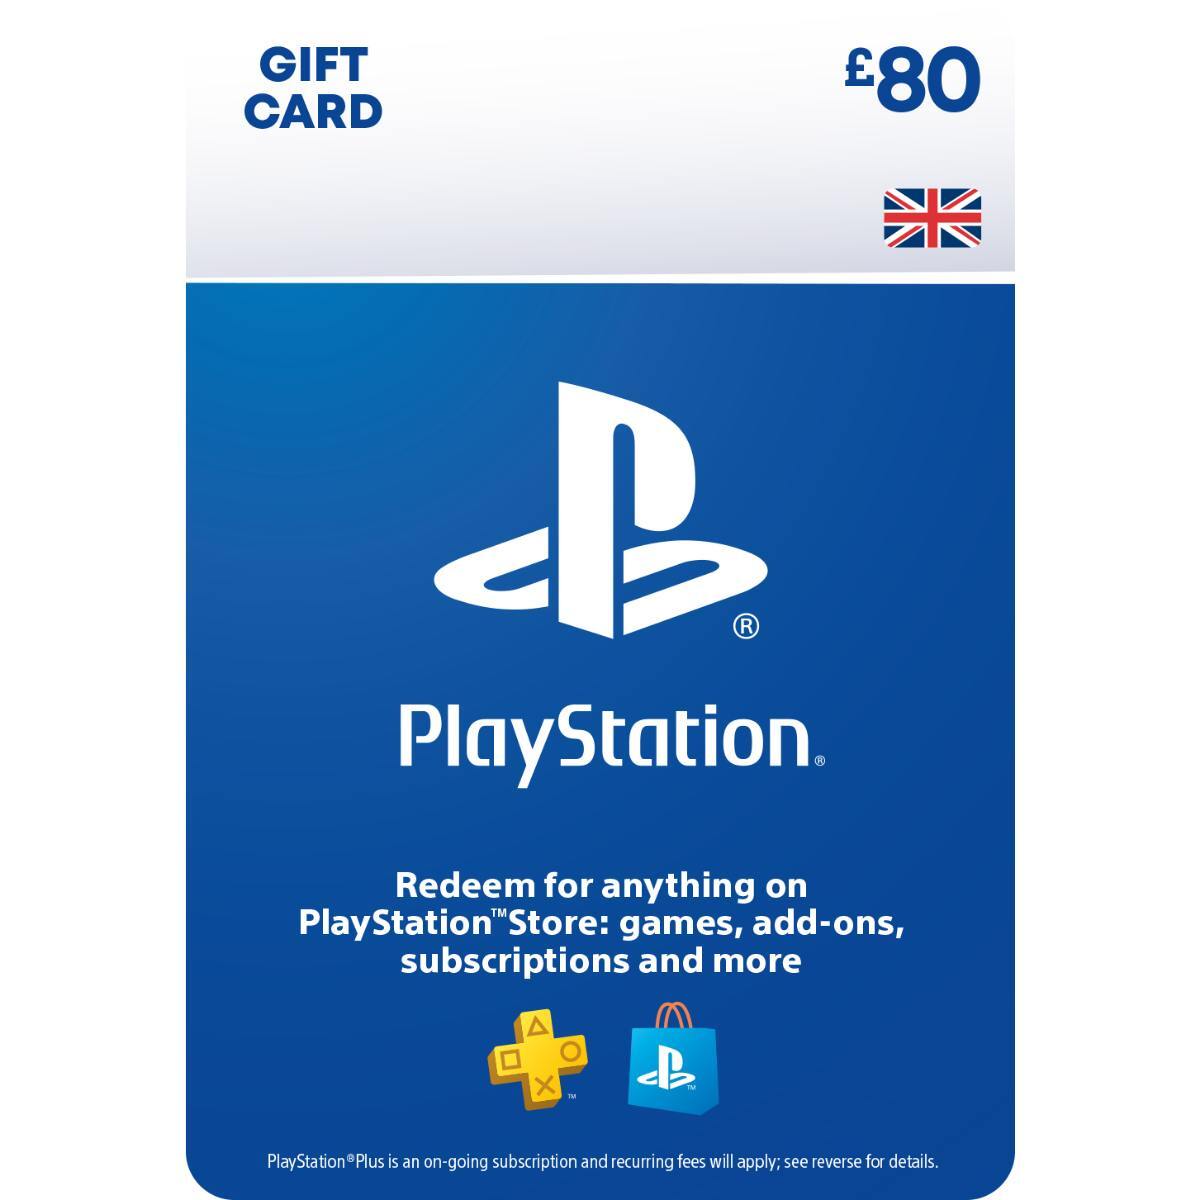 SALE: £68.00 PlayStation Store Gift Card £80 PS5 / PS4 | PSN UK Account #PSN DIGITAL #SONY #PlayStationStoreGiftCard80PS5PS4 #PlayStationPlus #PlayStationStore #PlayStation #PSPlusPremium #PSPlus #VideoGames: Get More, Play More with PlayStation® Gift… dlvr.it/T7XpDl